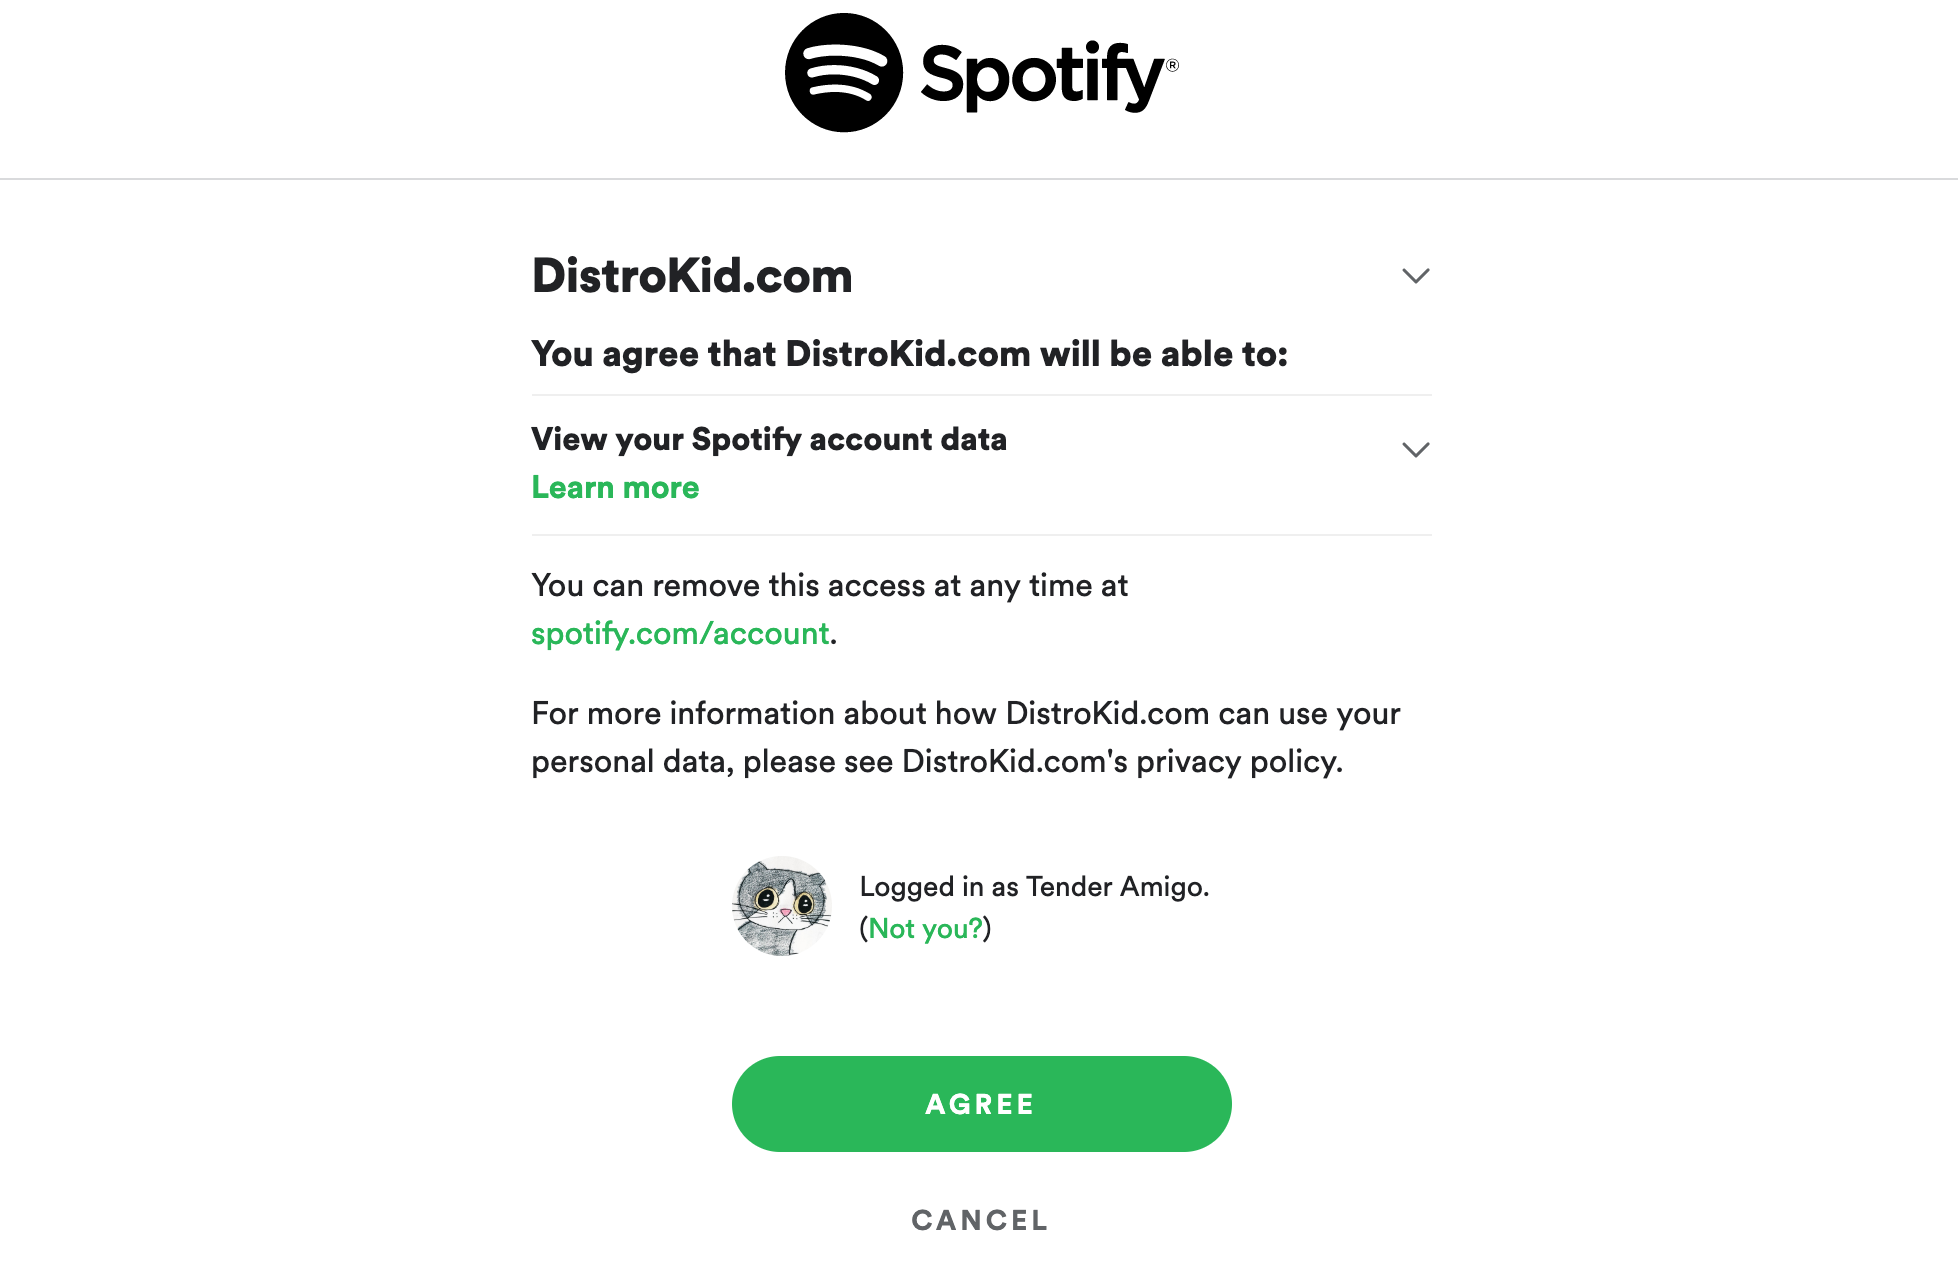 Can't access my profile via Distrokid The Spotify Community